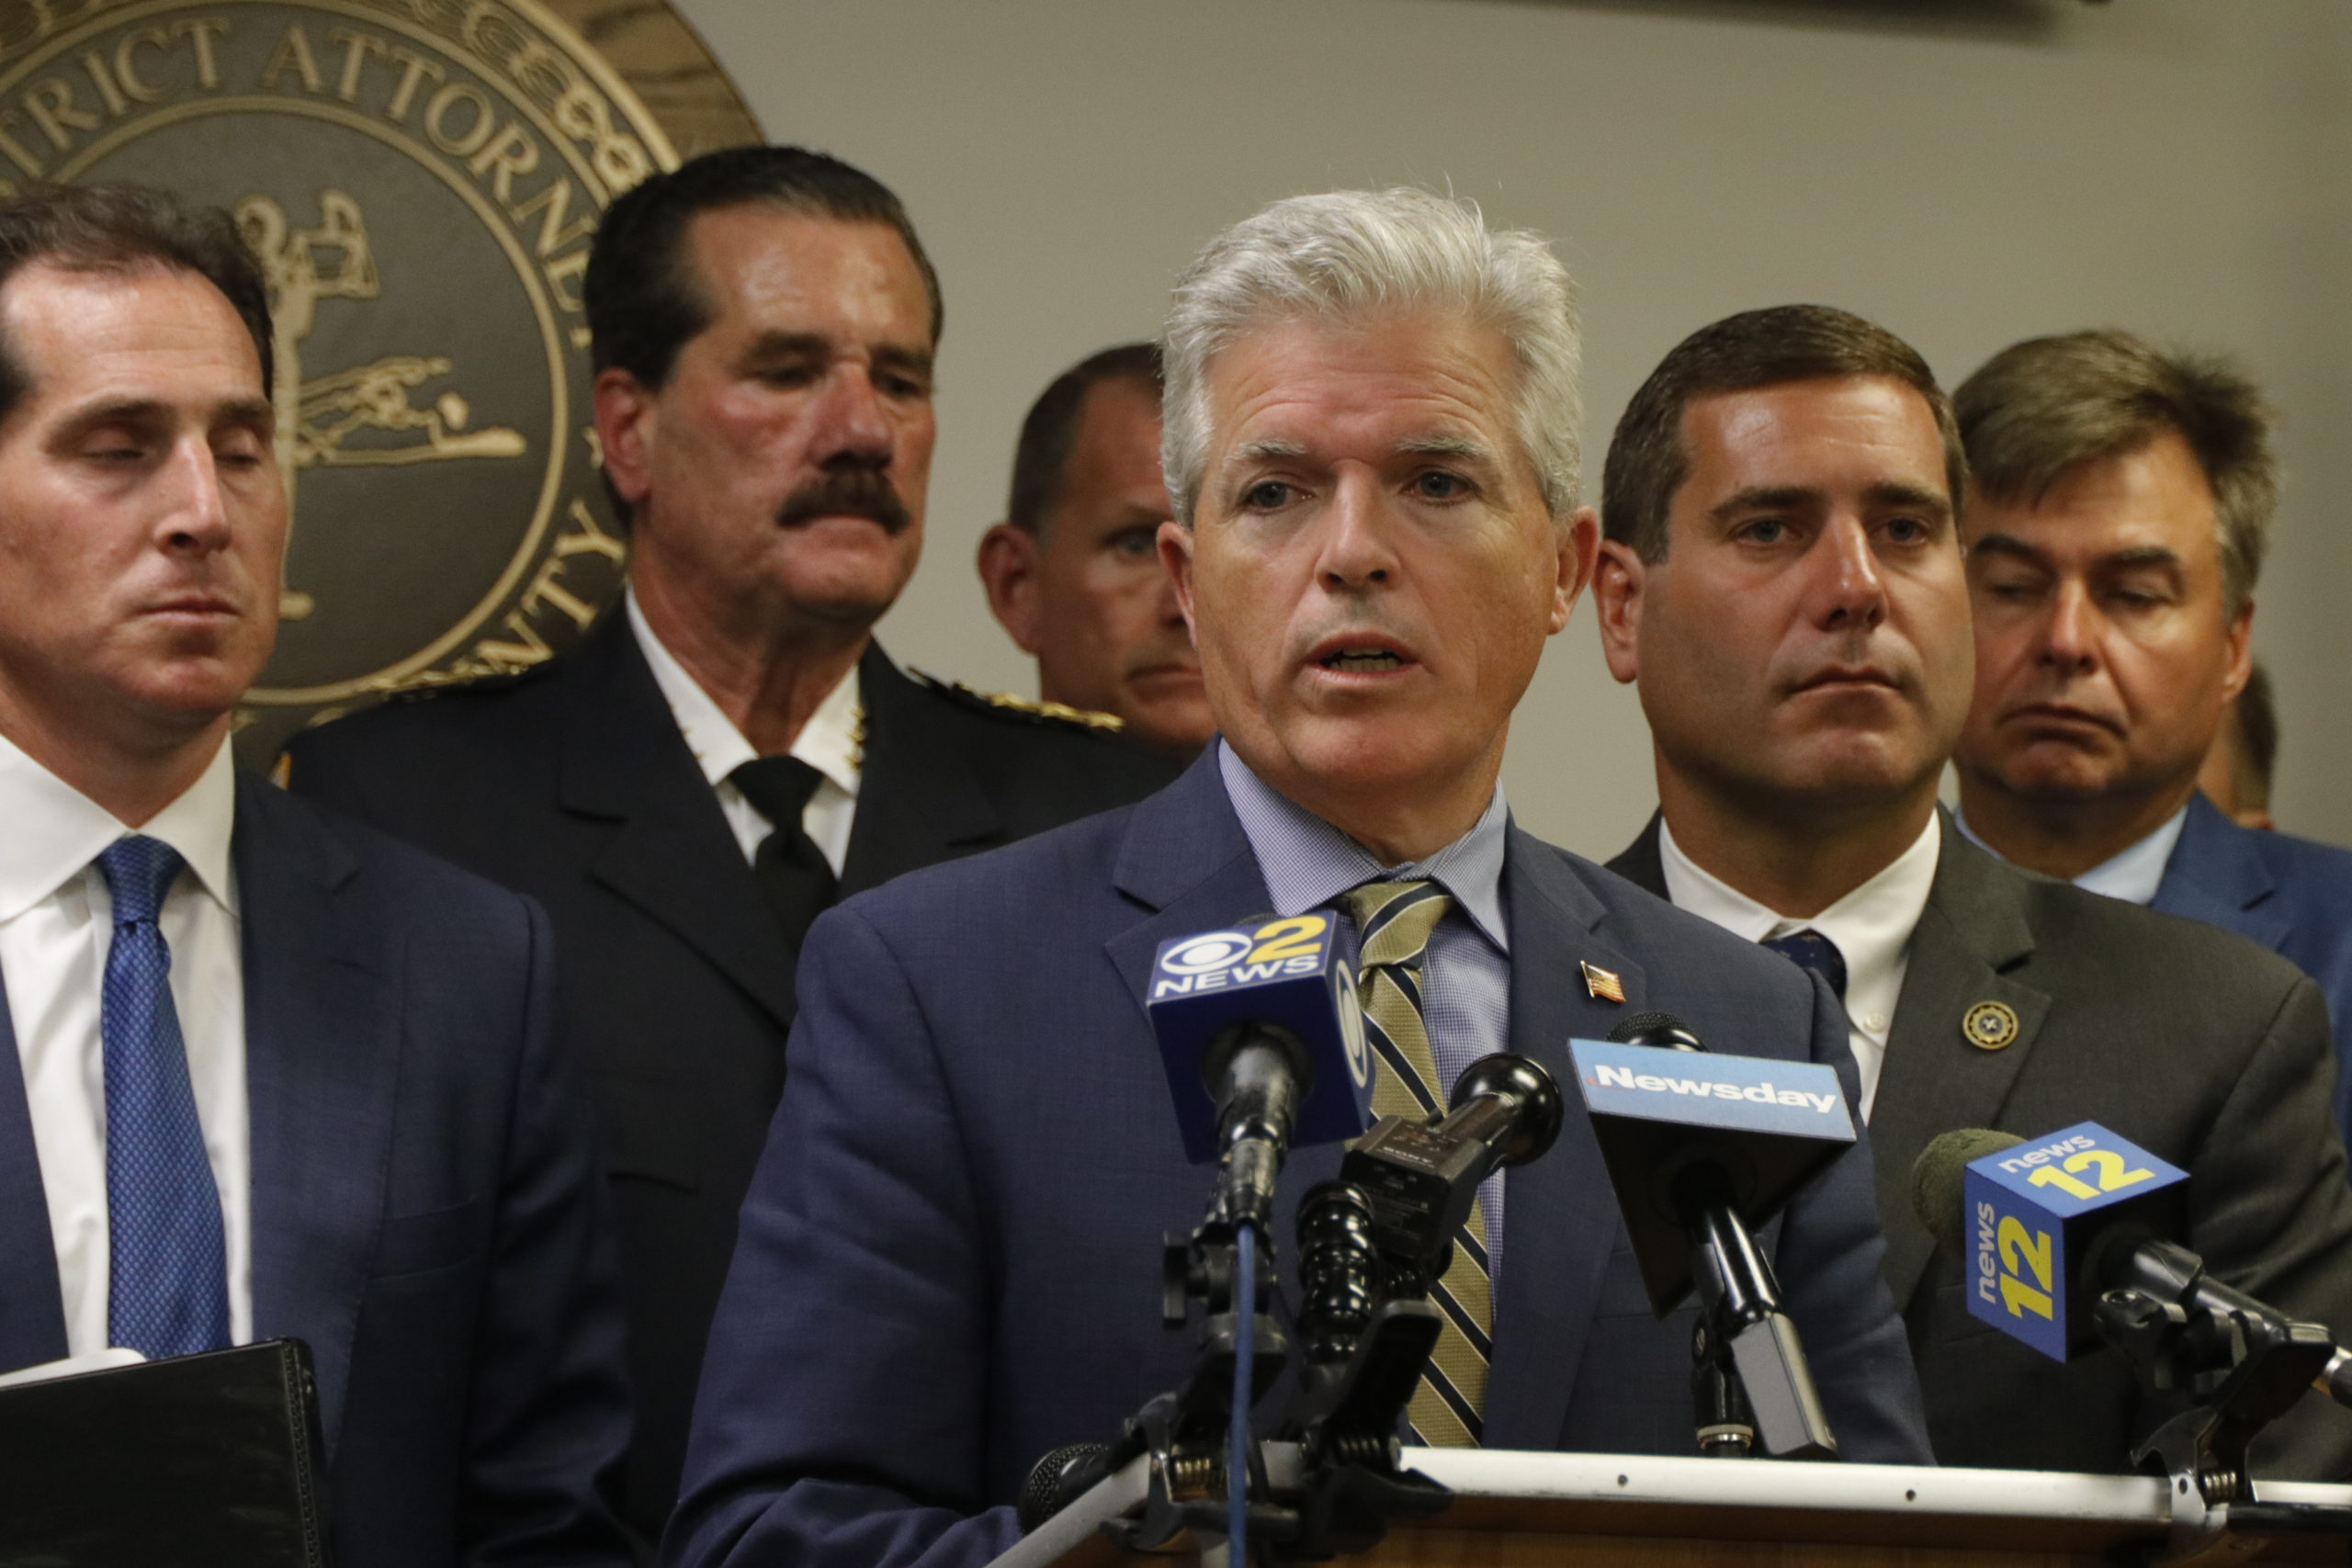 Suffolk County Executive Steve Bellone urged  the passage of the 